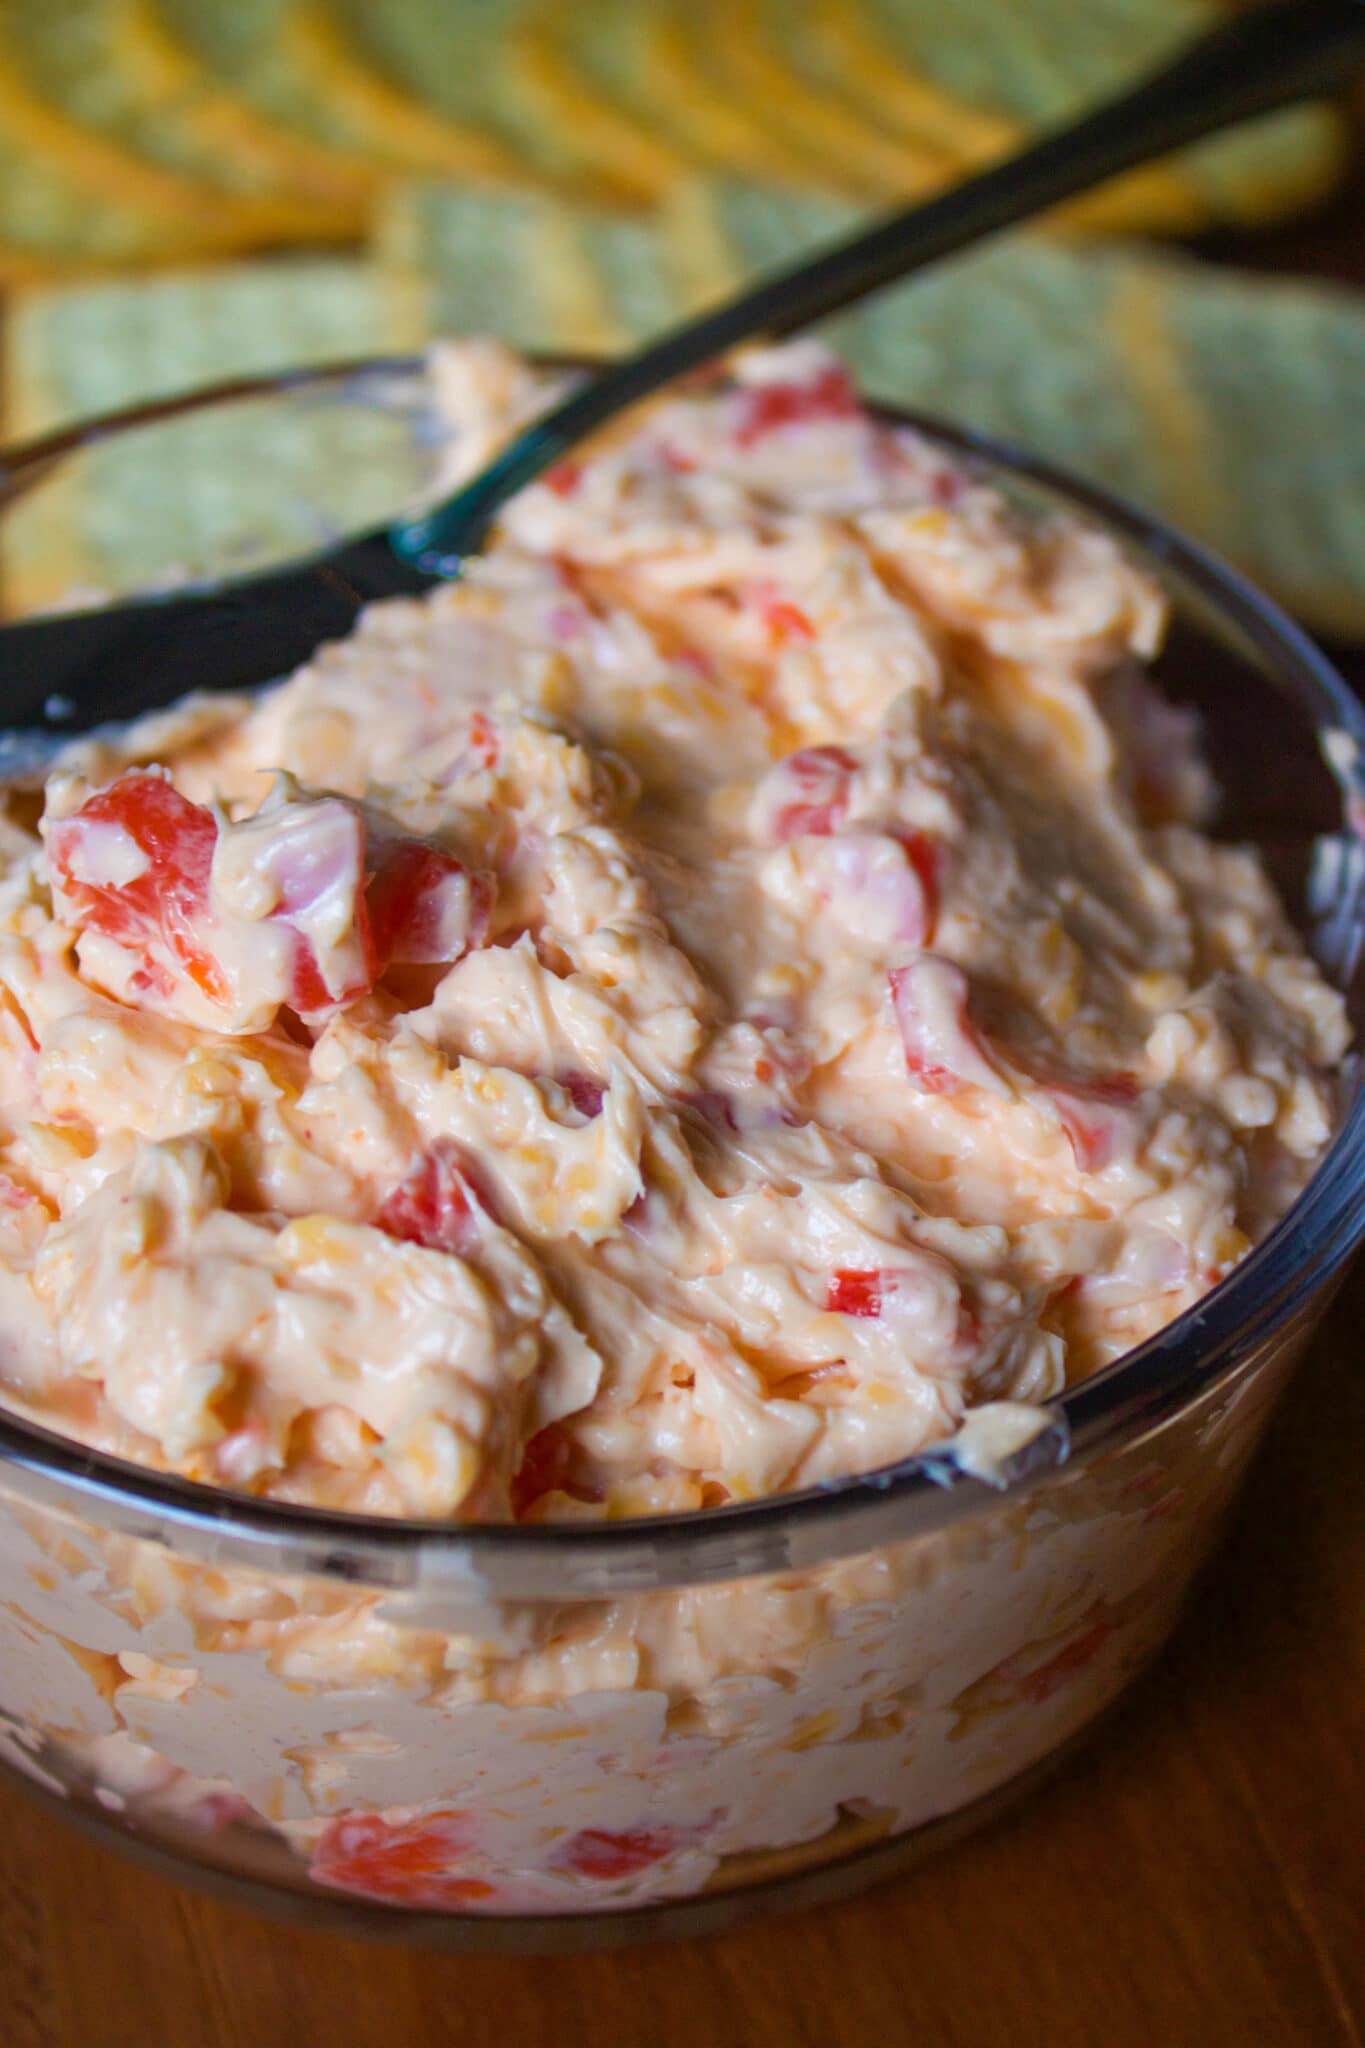 cheese spreader dipped into pimento cheese in a glass bowl